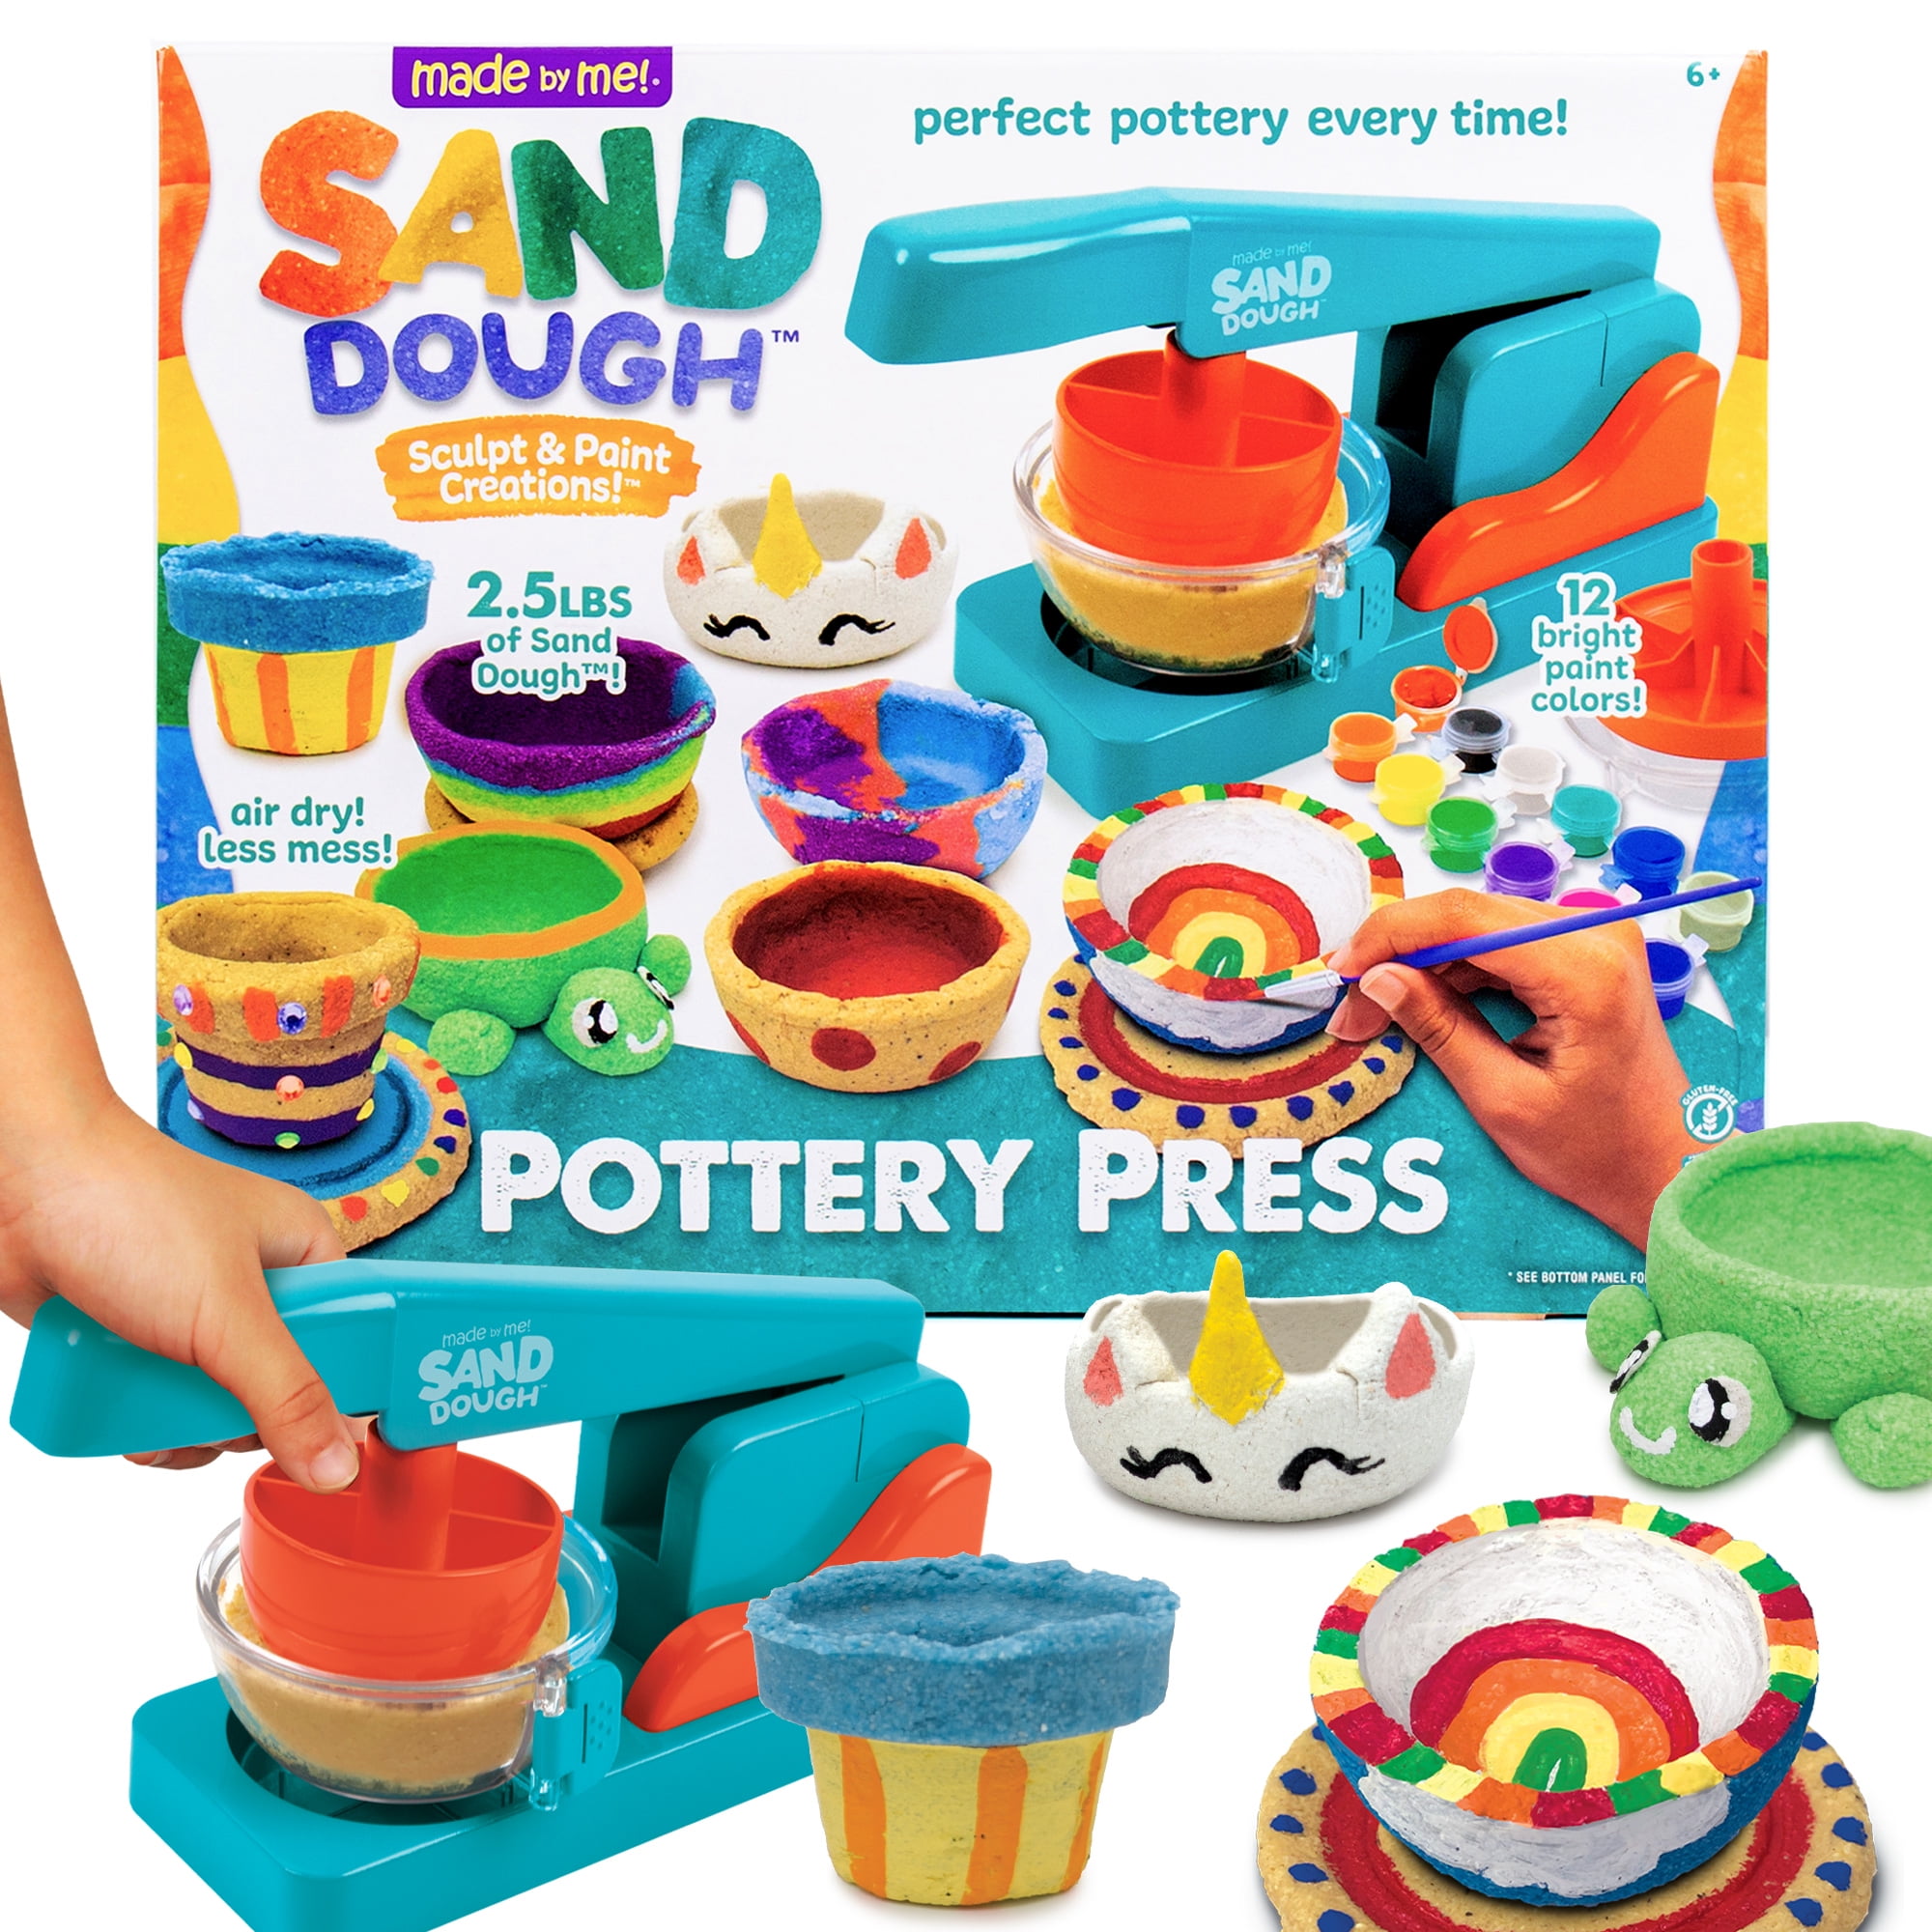 Made By Me! Sand Dough Sculpt & Paint Creations! Pottery Press